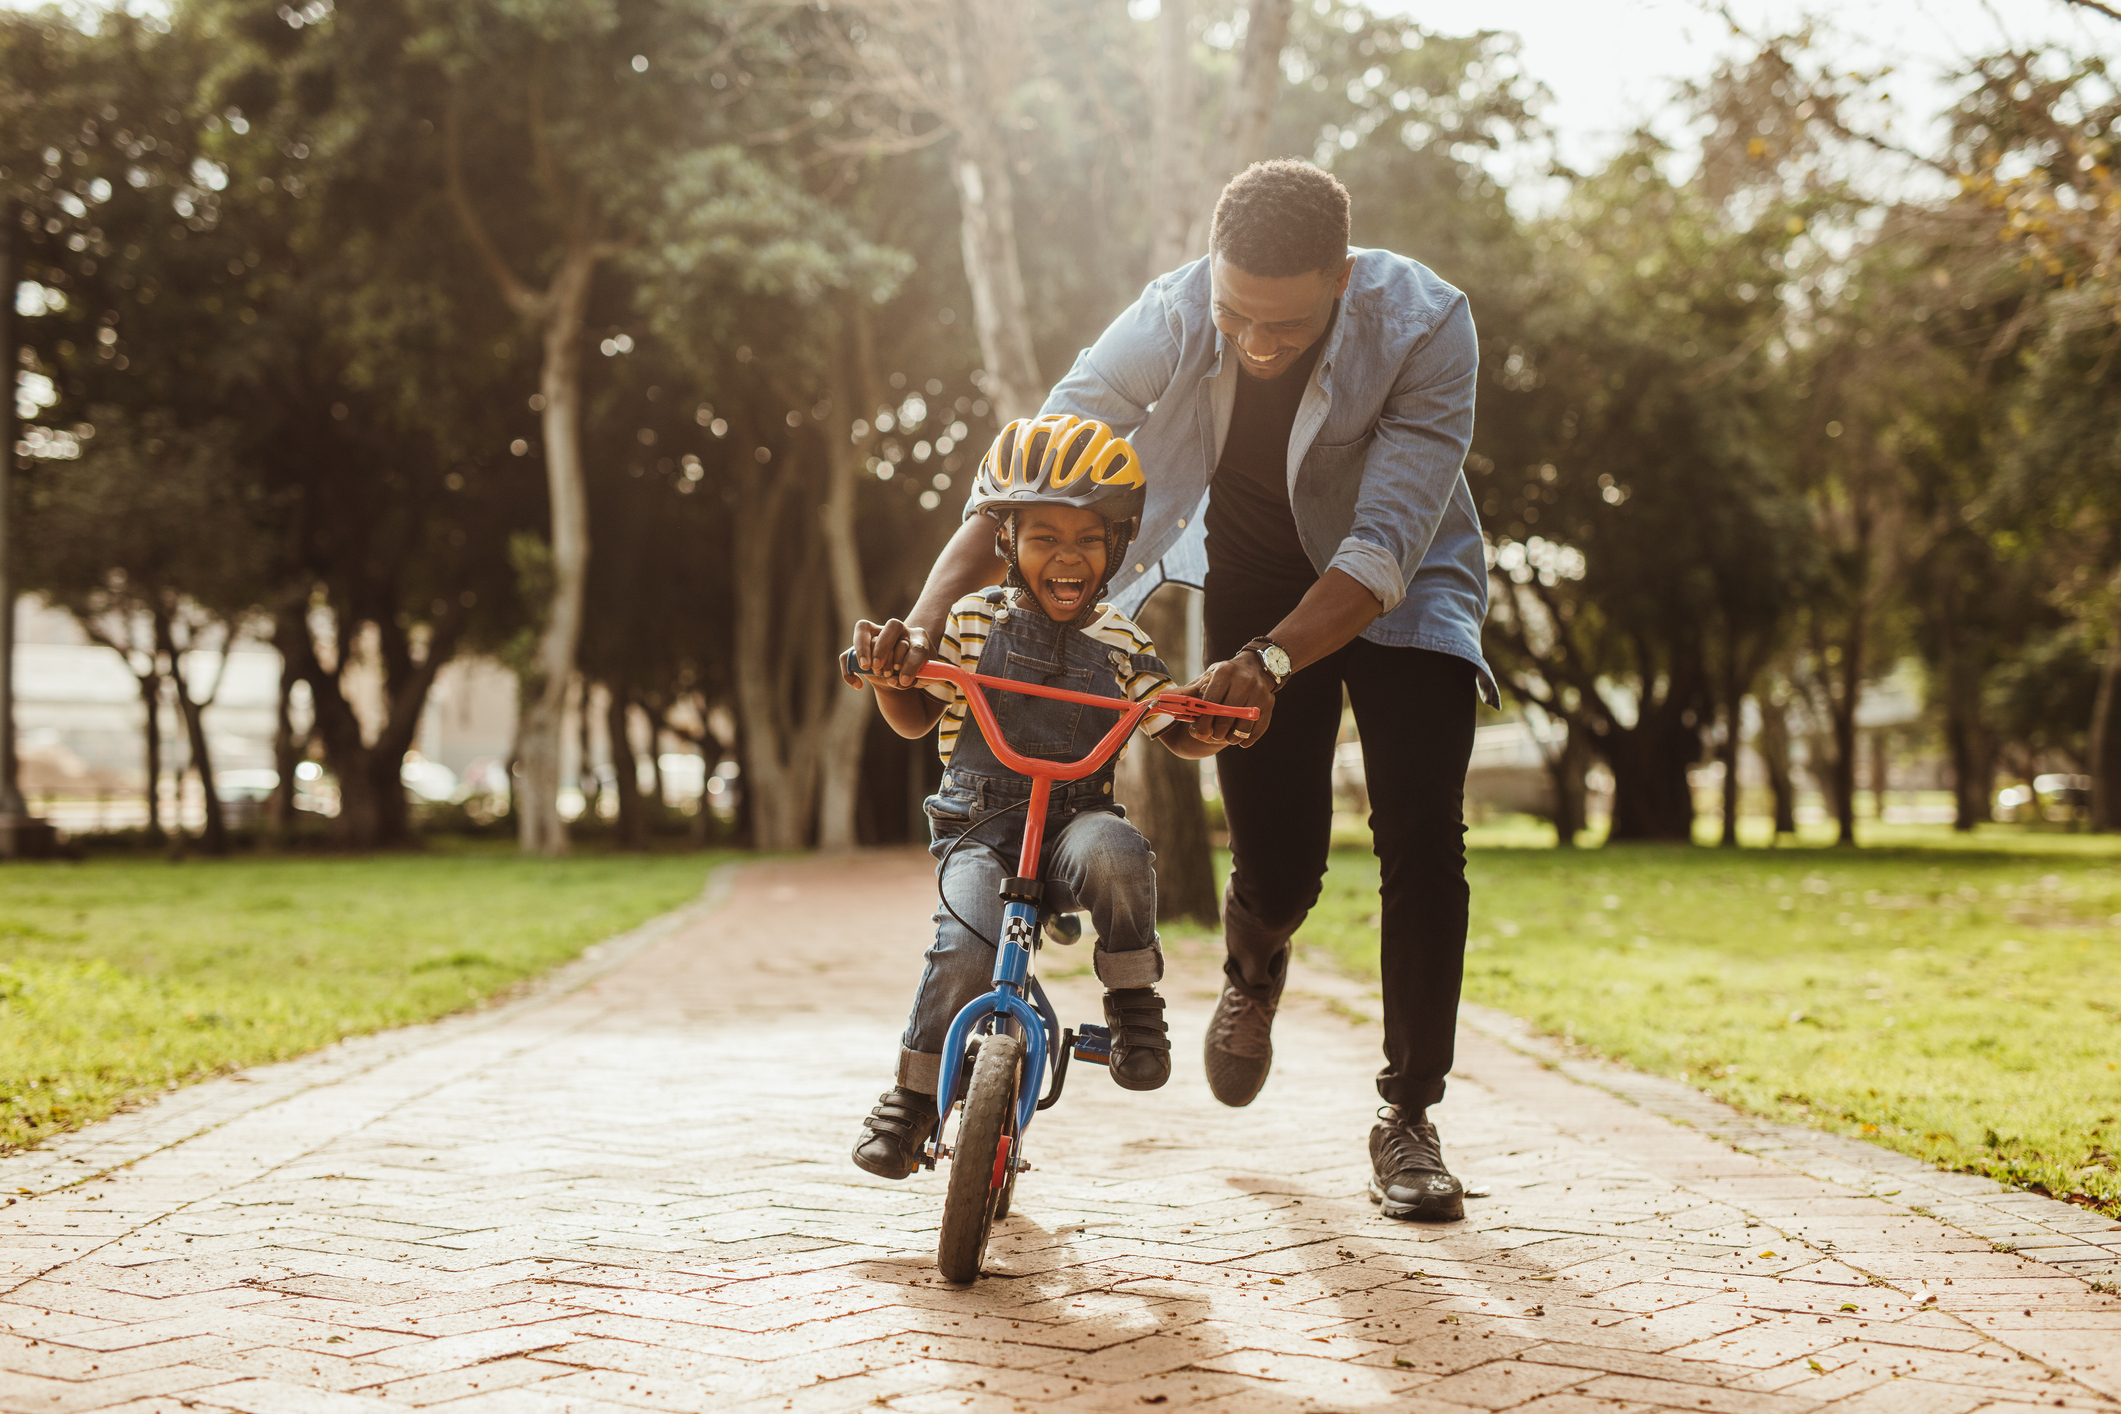 Adult assisting a child with learning to ride a bike in a park setting. Both are smiling